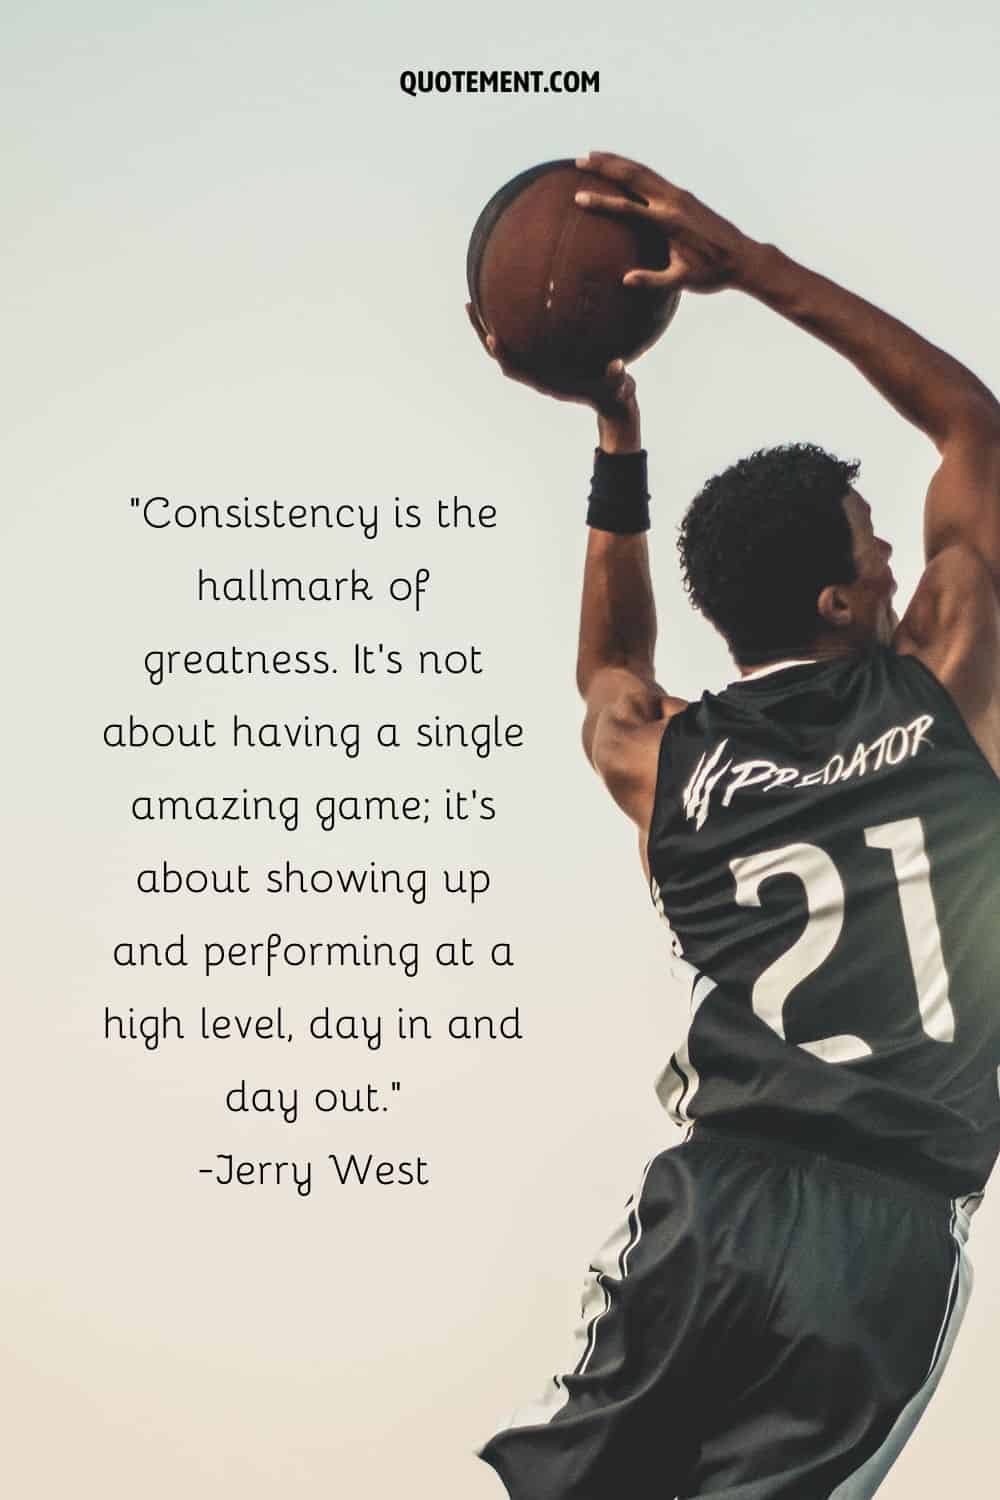 Consistency is the hallmark of greatness